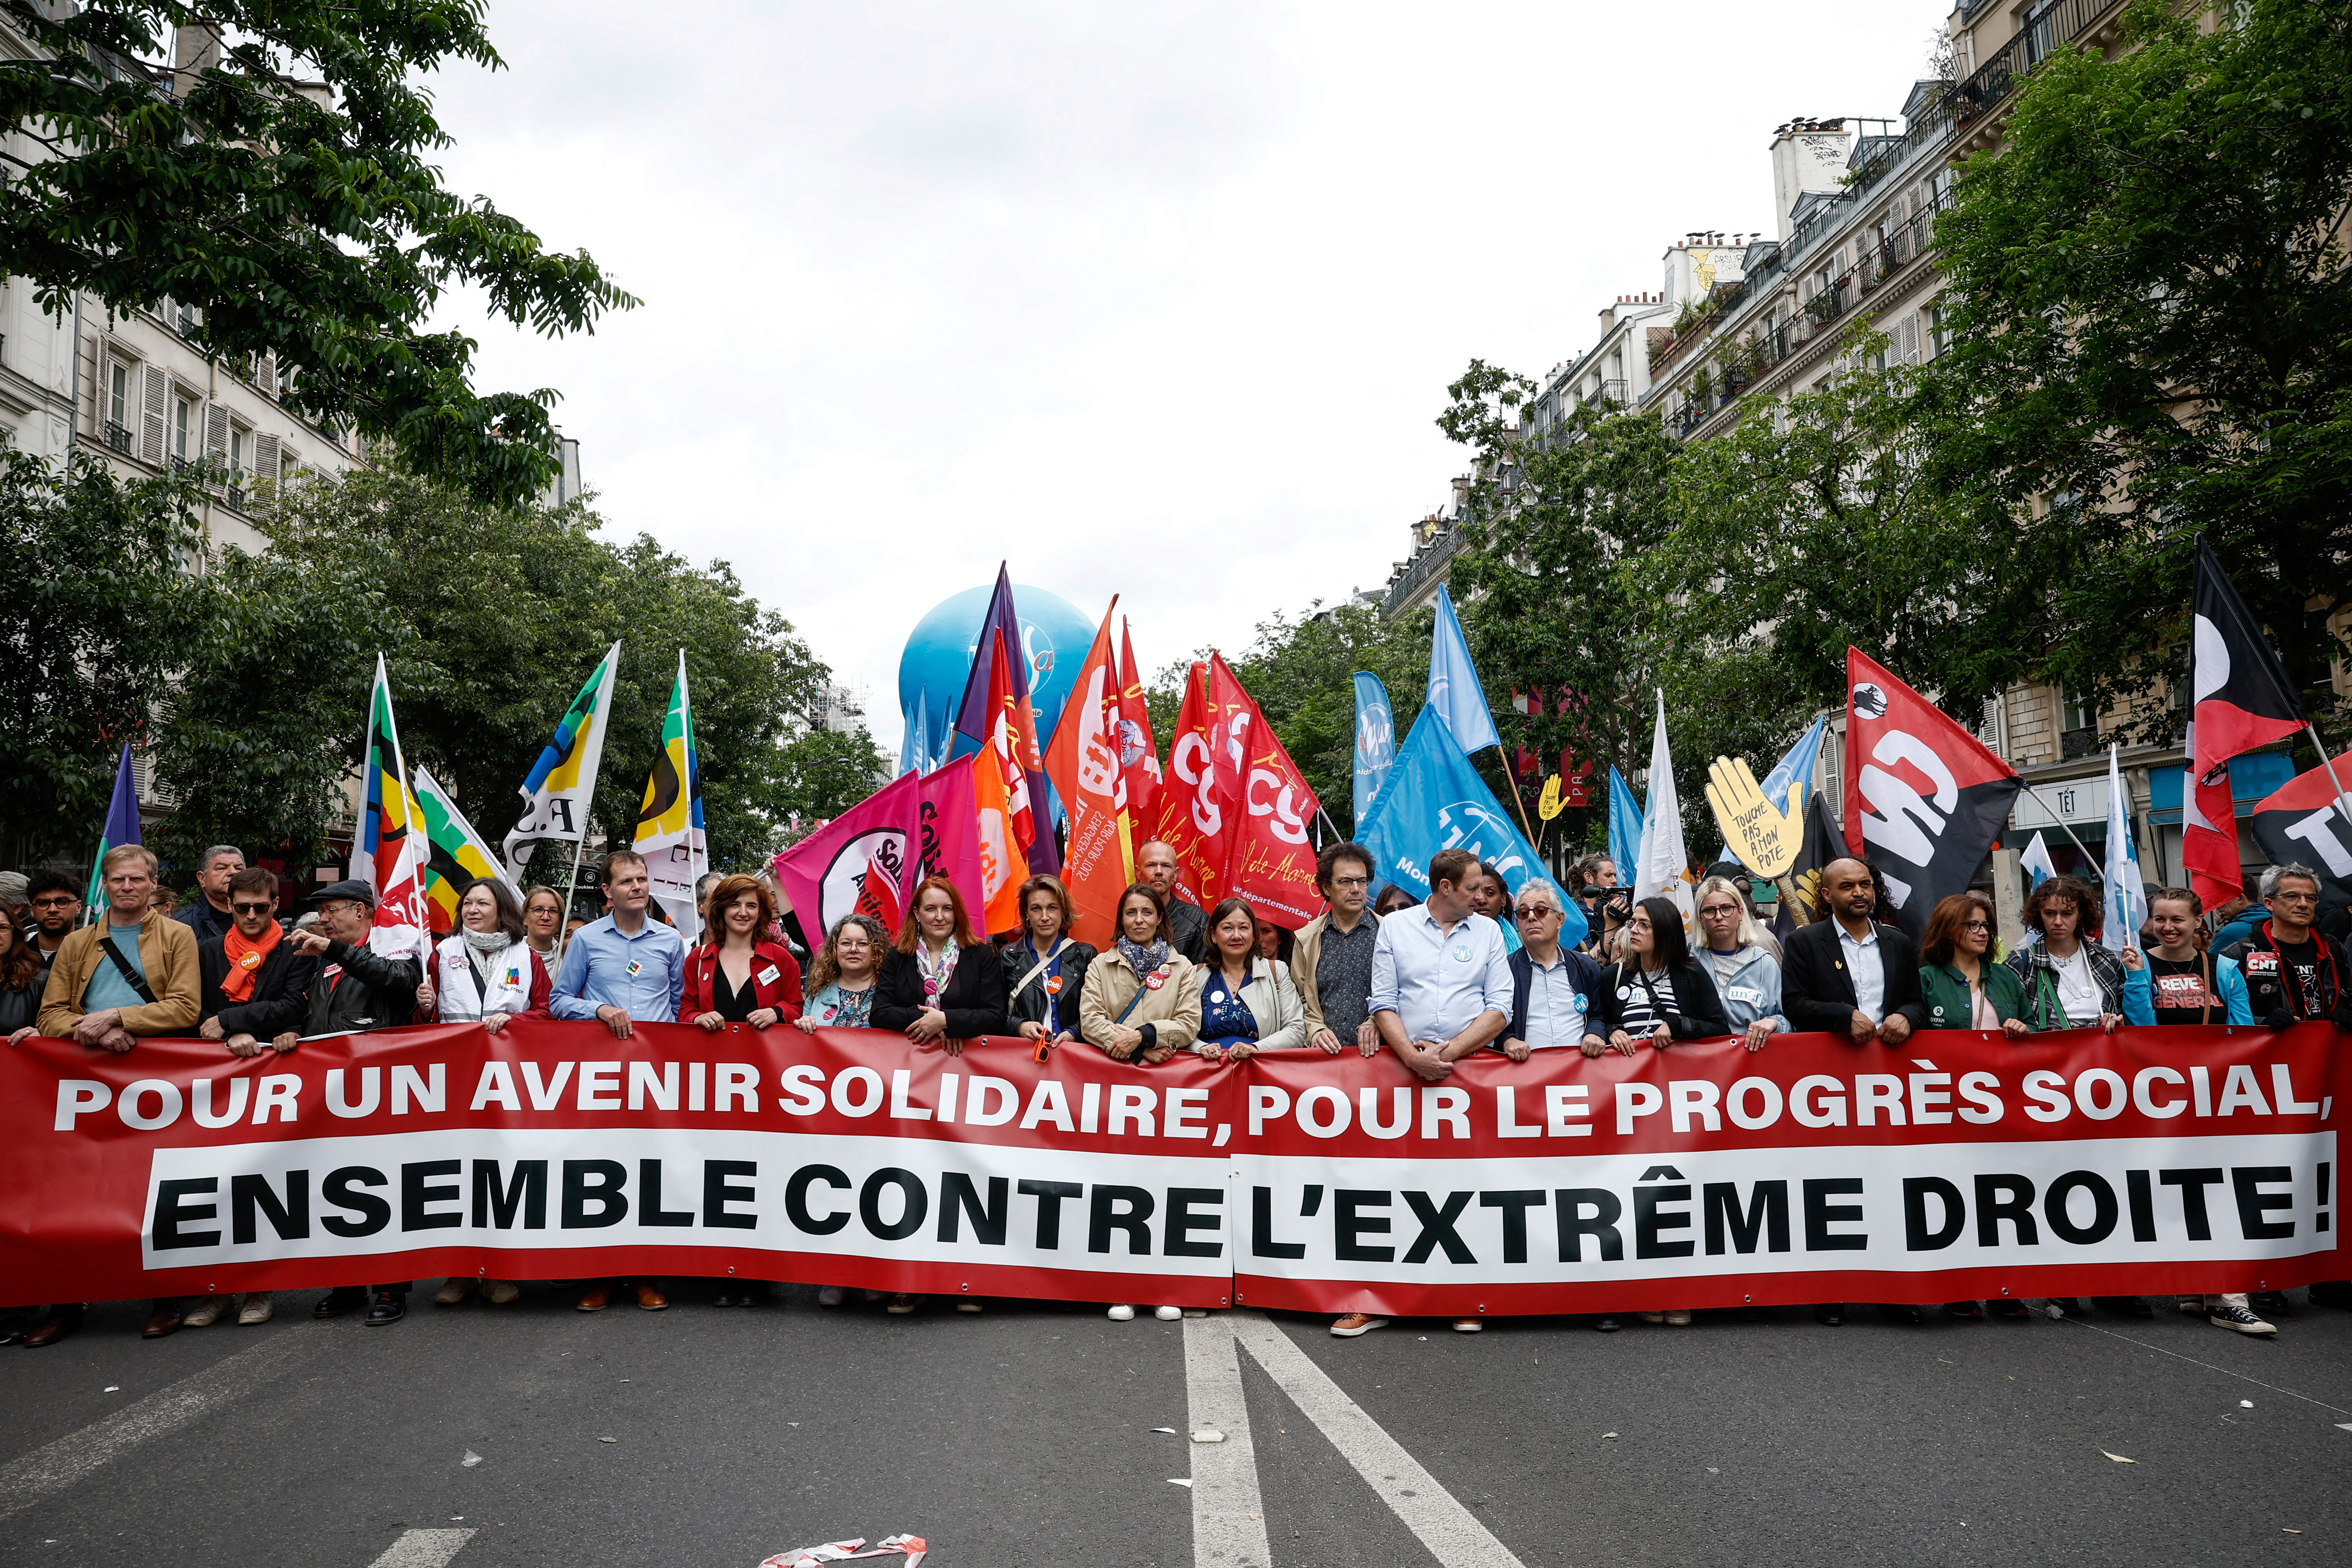 Demonstration against the French far-right National Rally party, in Paris